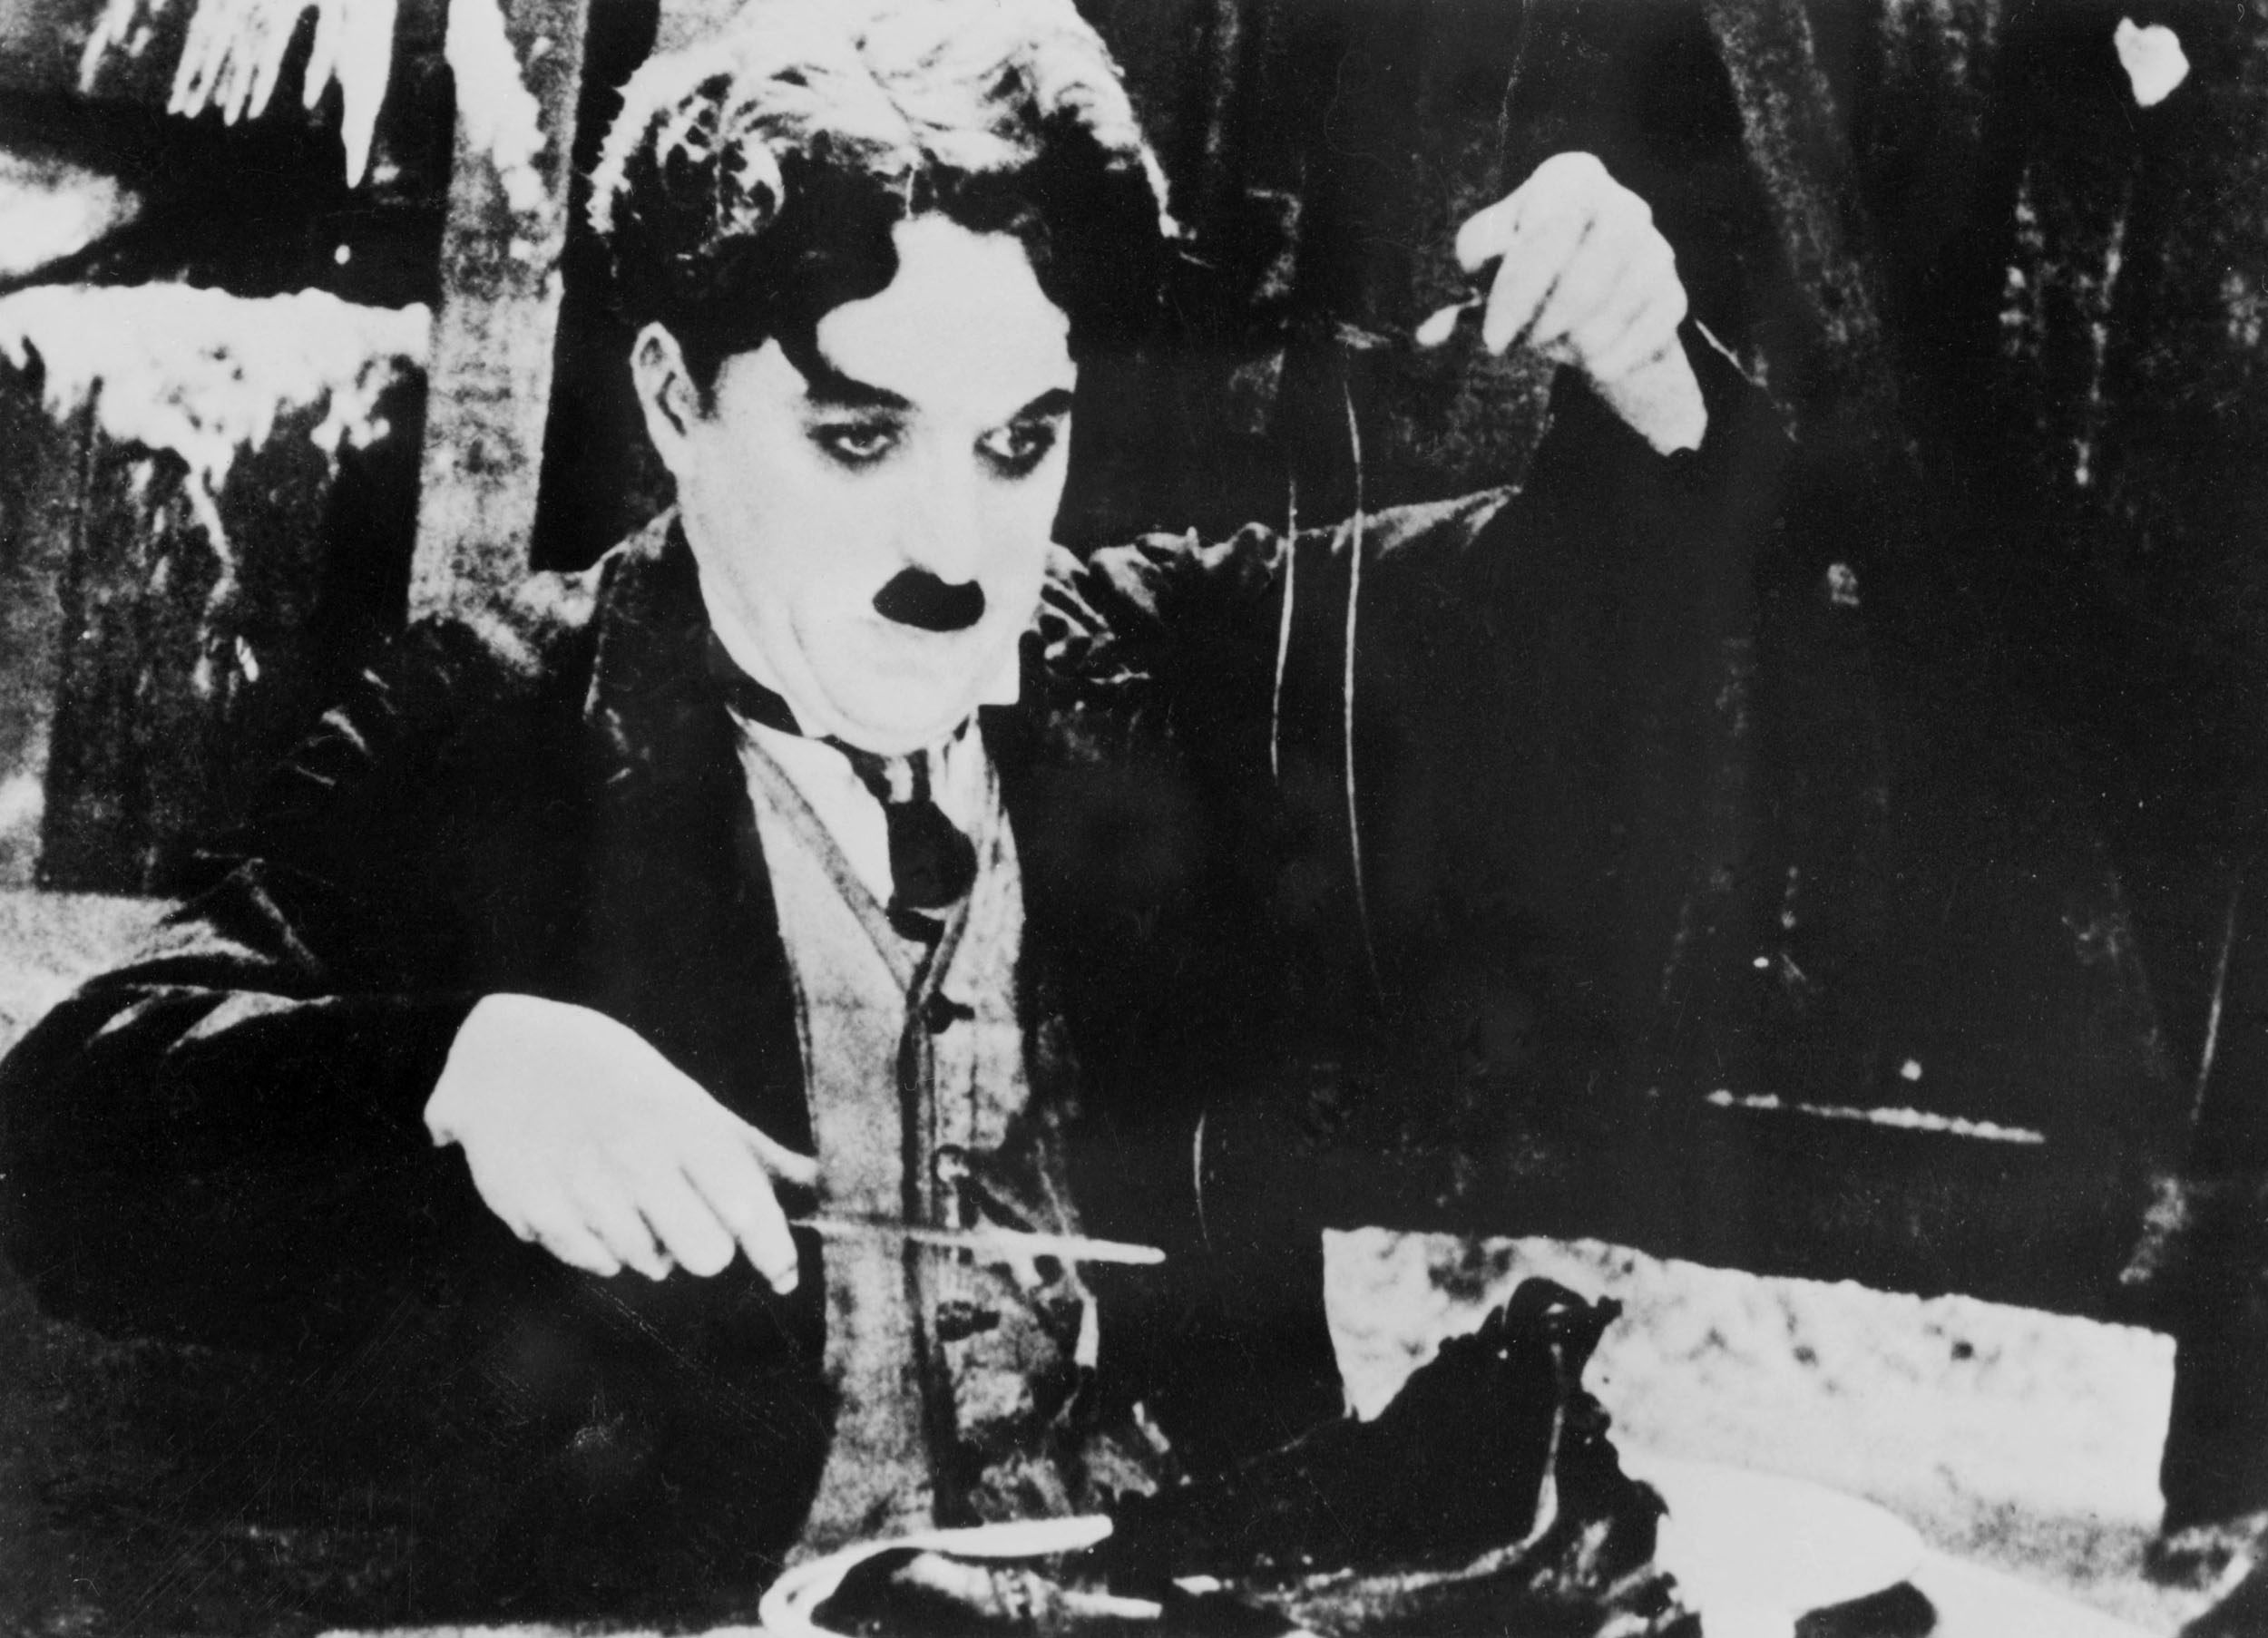 Charlie Chaplin in a scene from The Gold Rush (1925). Preserving the film that classic movies were captured on is key to the survival of Hollywood’s extensive back catalogue into the future. Photo: AFP